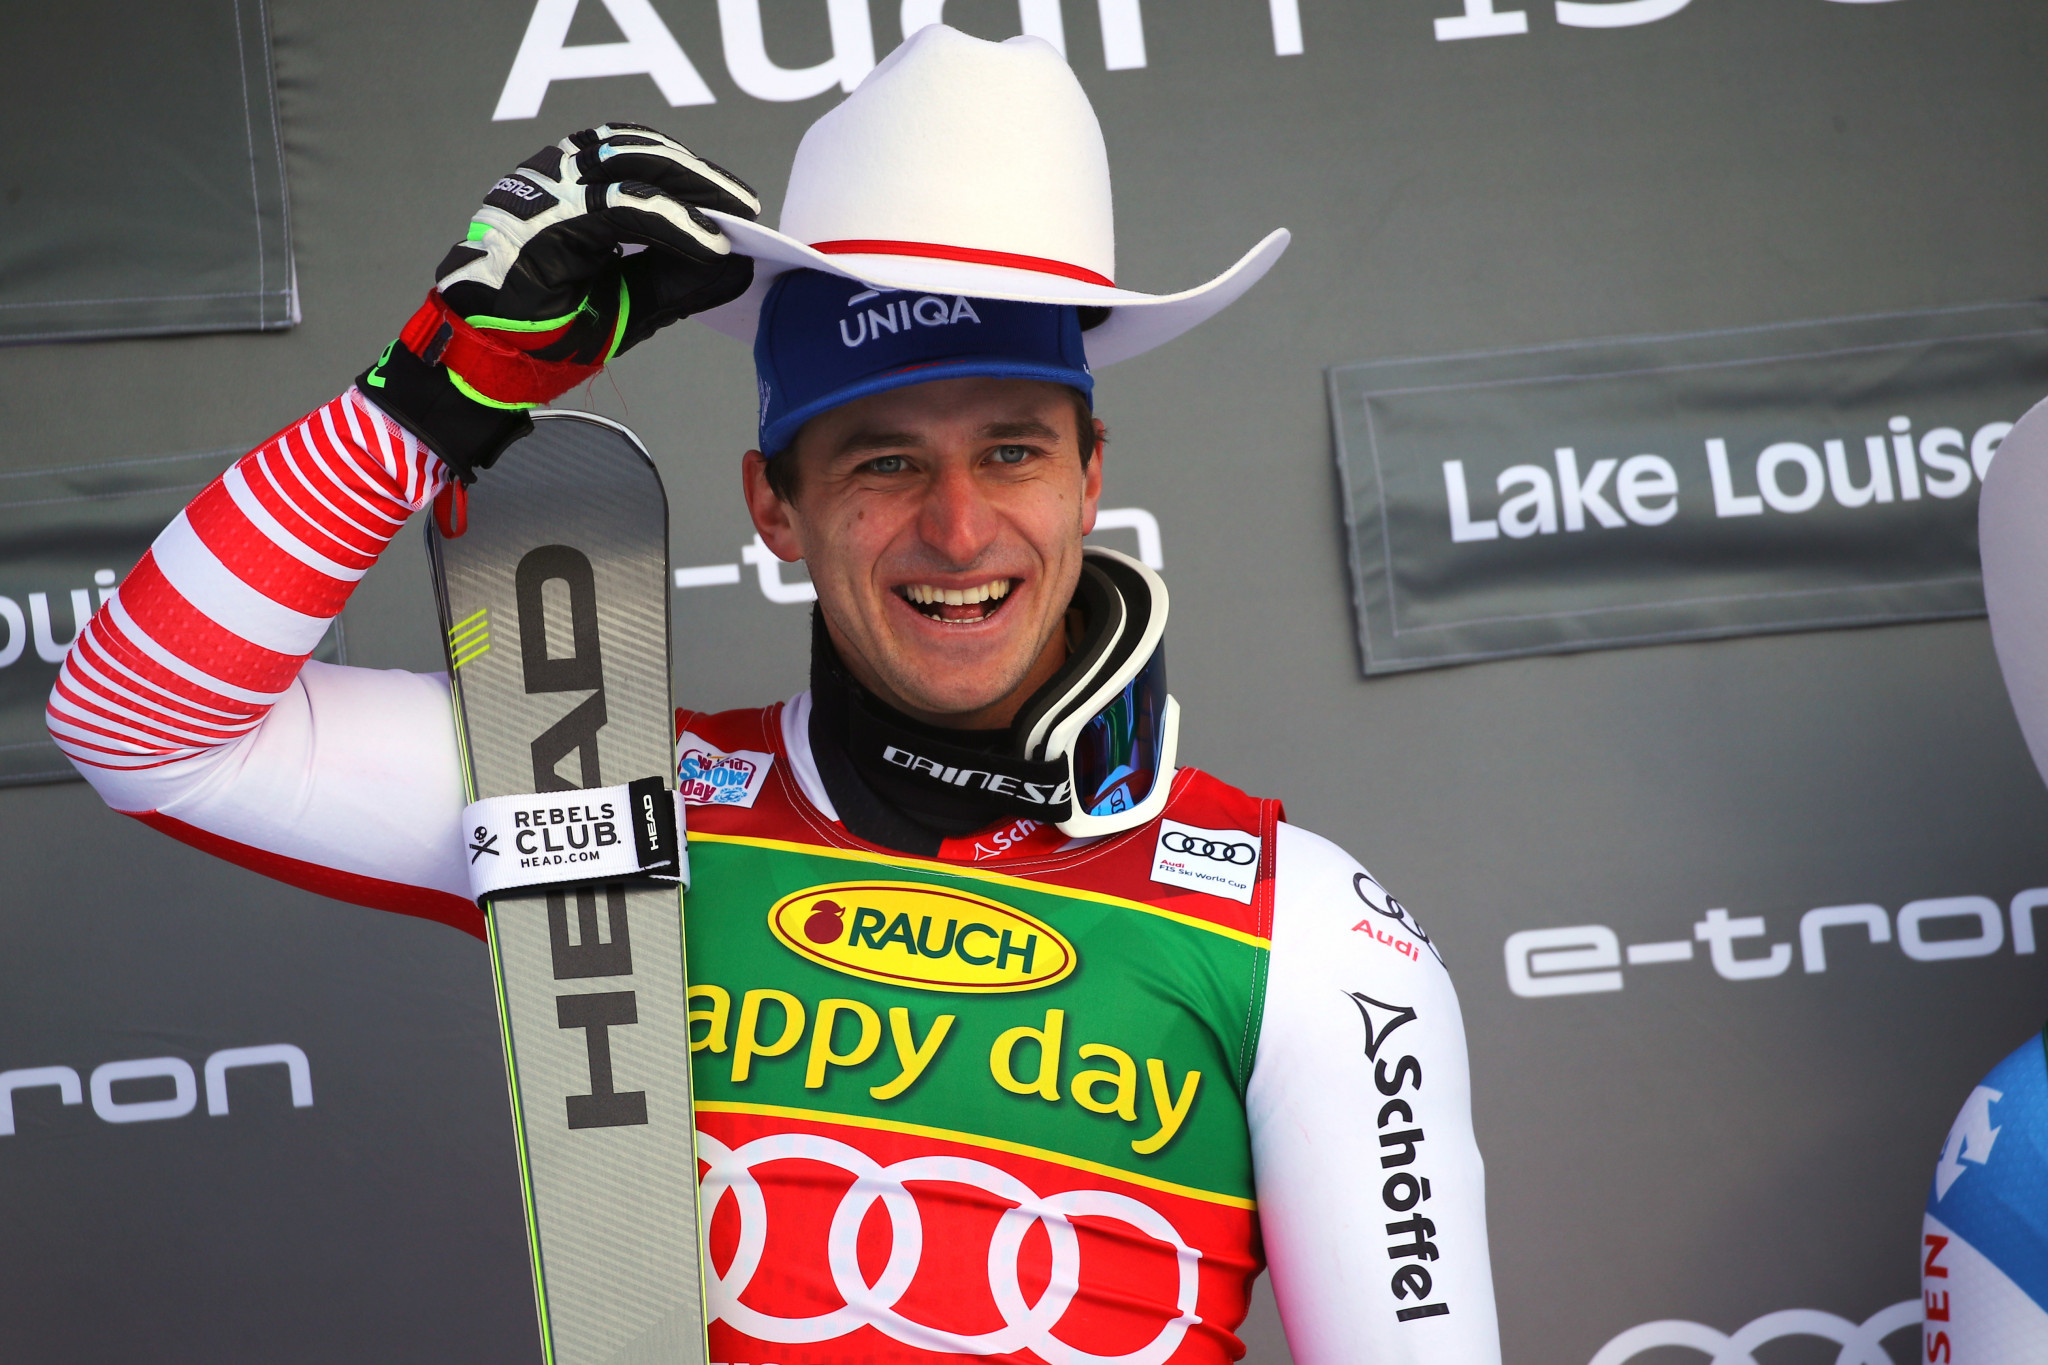 Double Olympic champion Mayer wins opening super-G of men's Alpine Skiing World Cup season